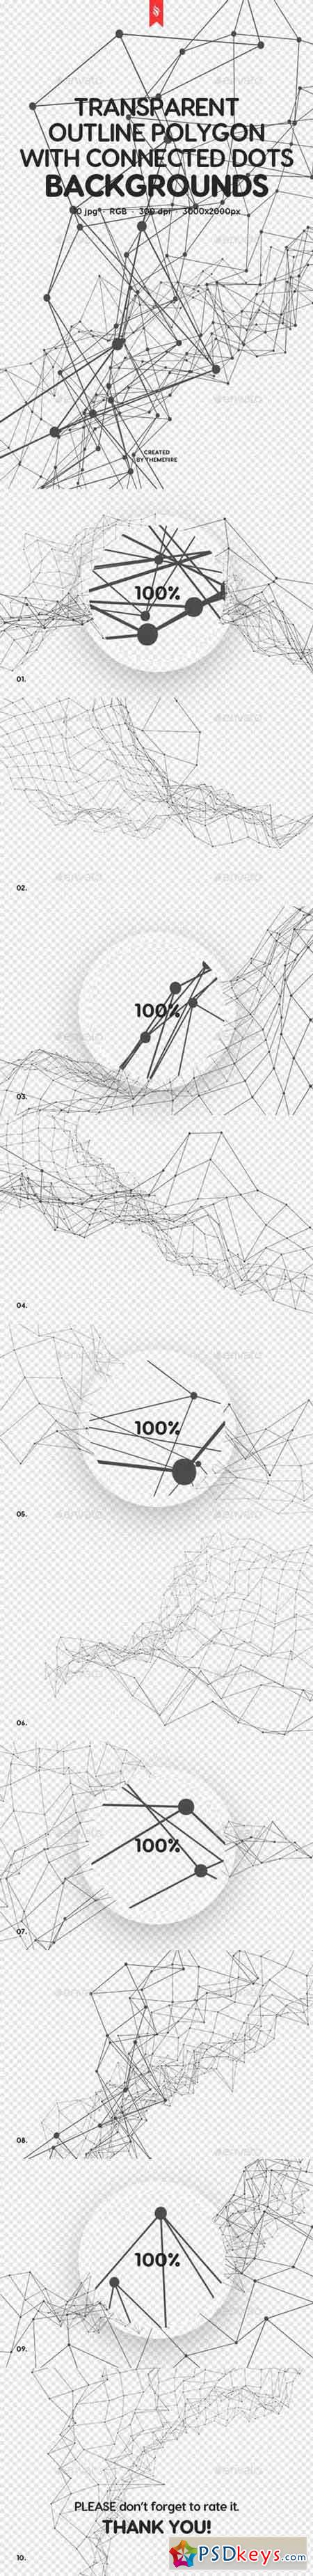 Transparent Outline Polygon with Connected Dots Backgrounds 20246235